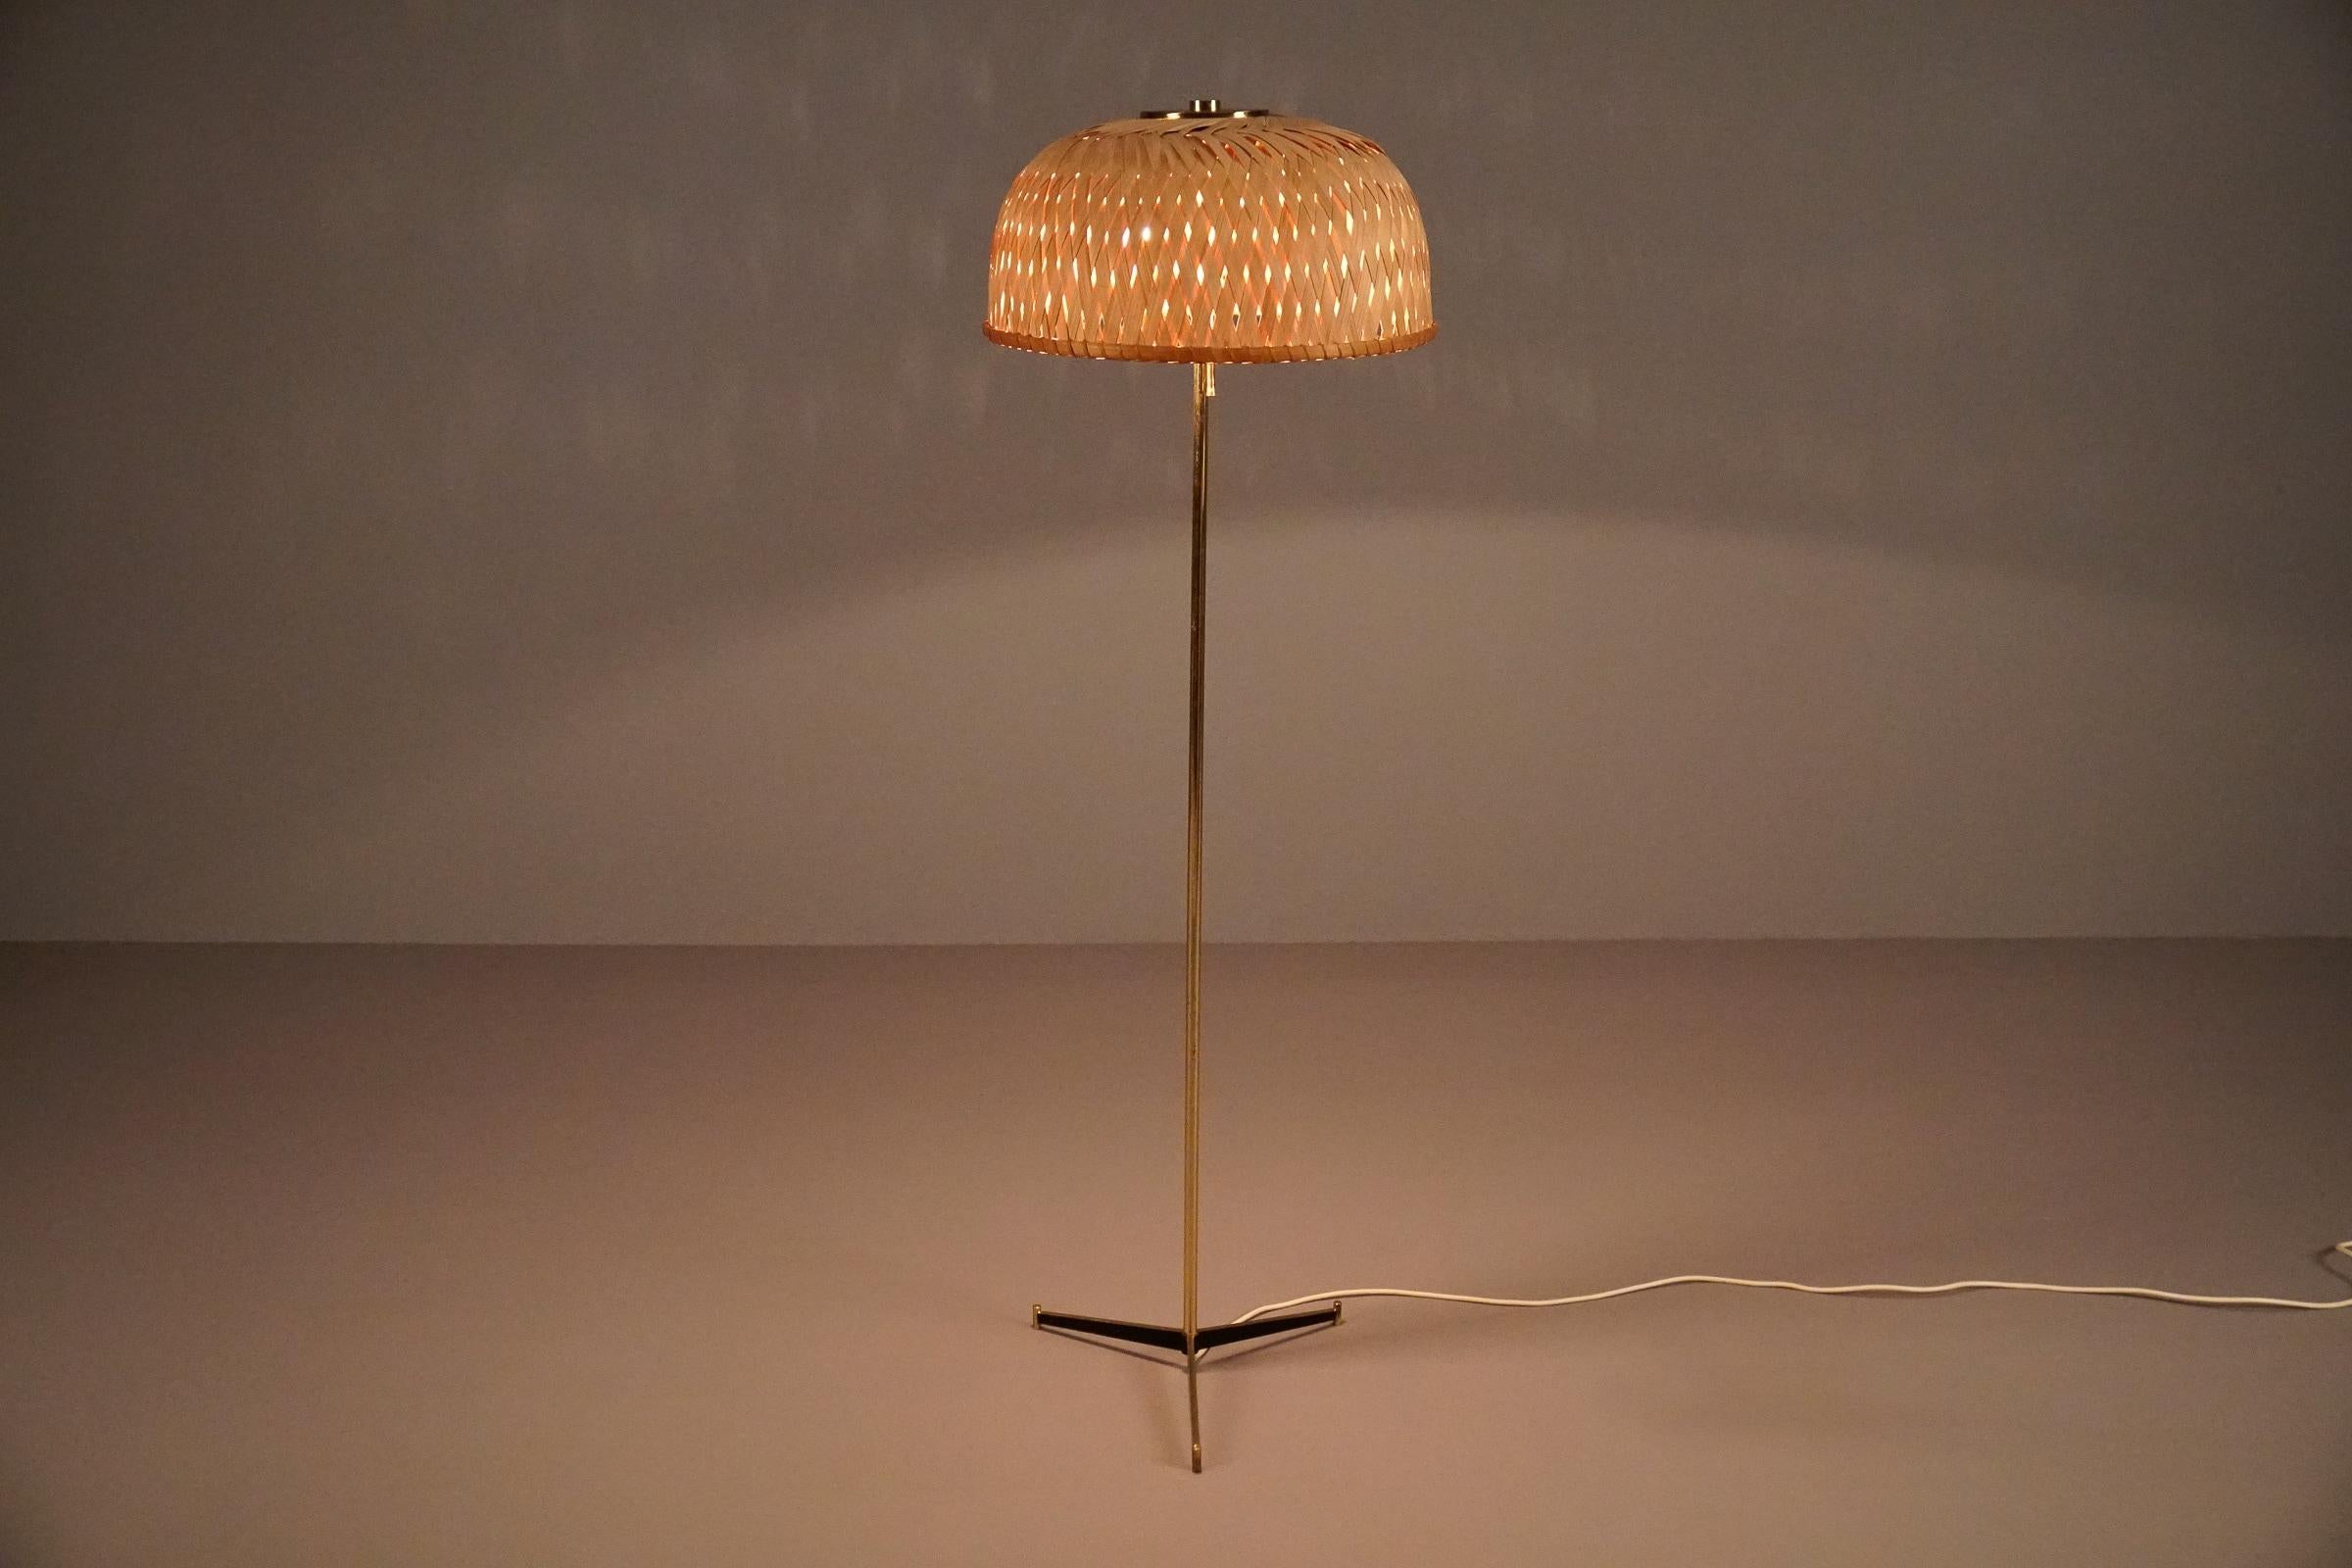 Mid-Century Modern Tripod Floor Lamp in Brass and Wicker Shade, 1950s Italy For Sale